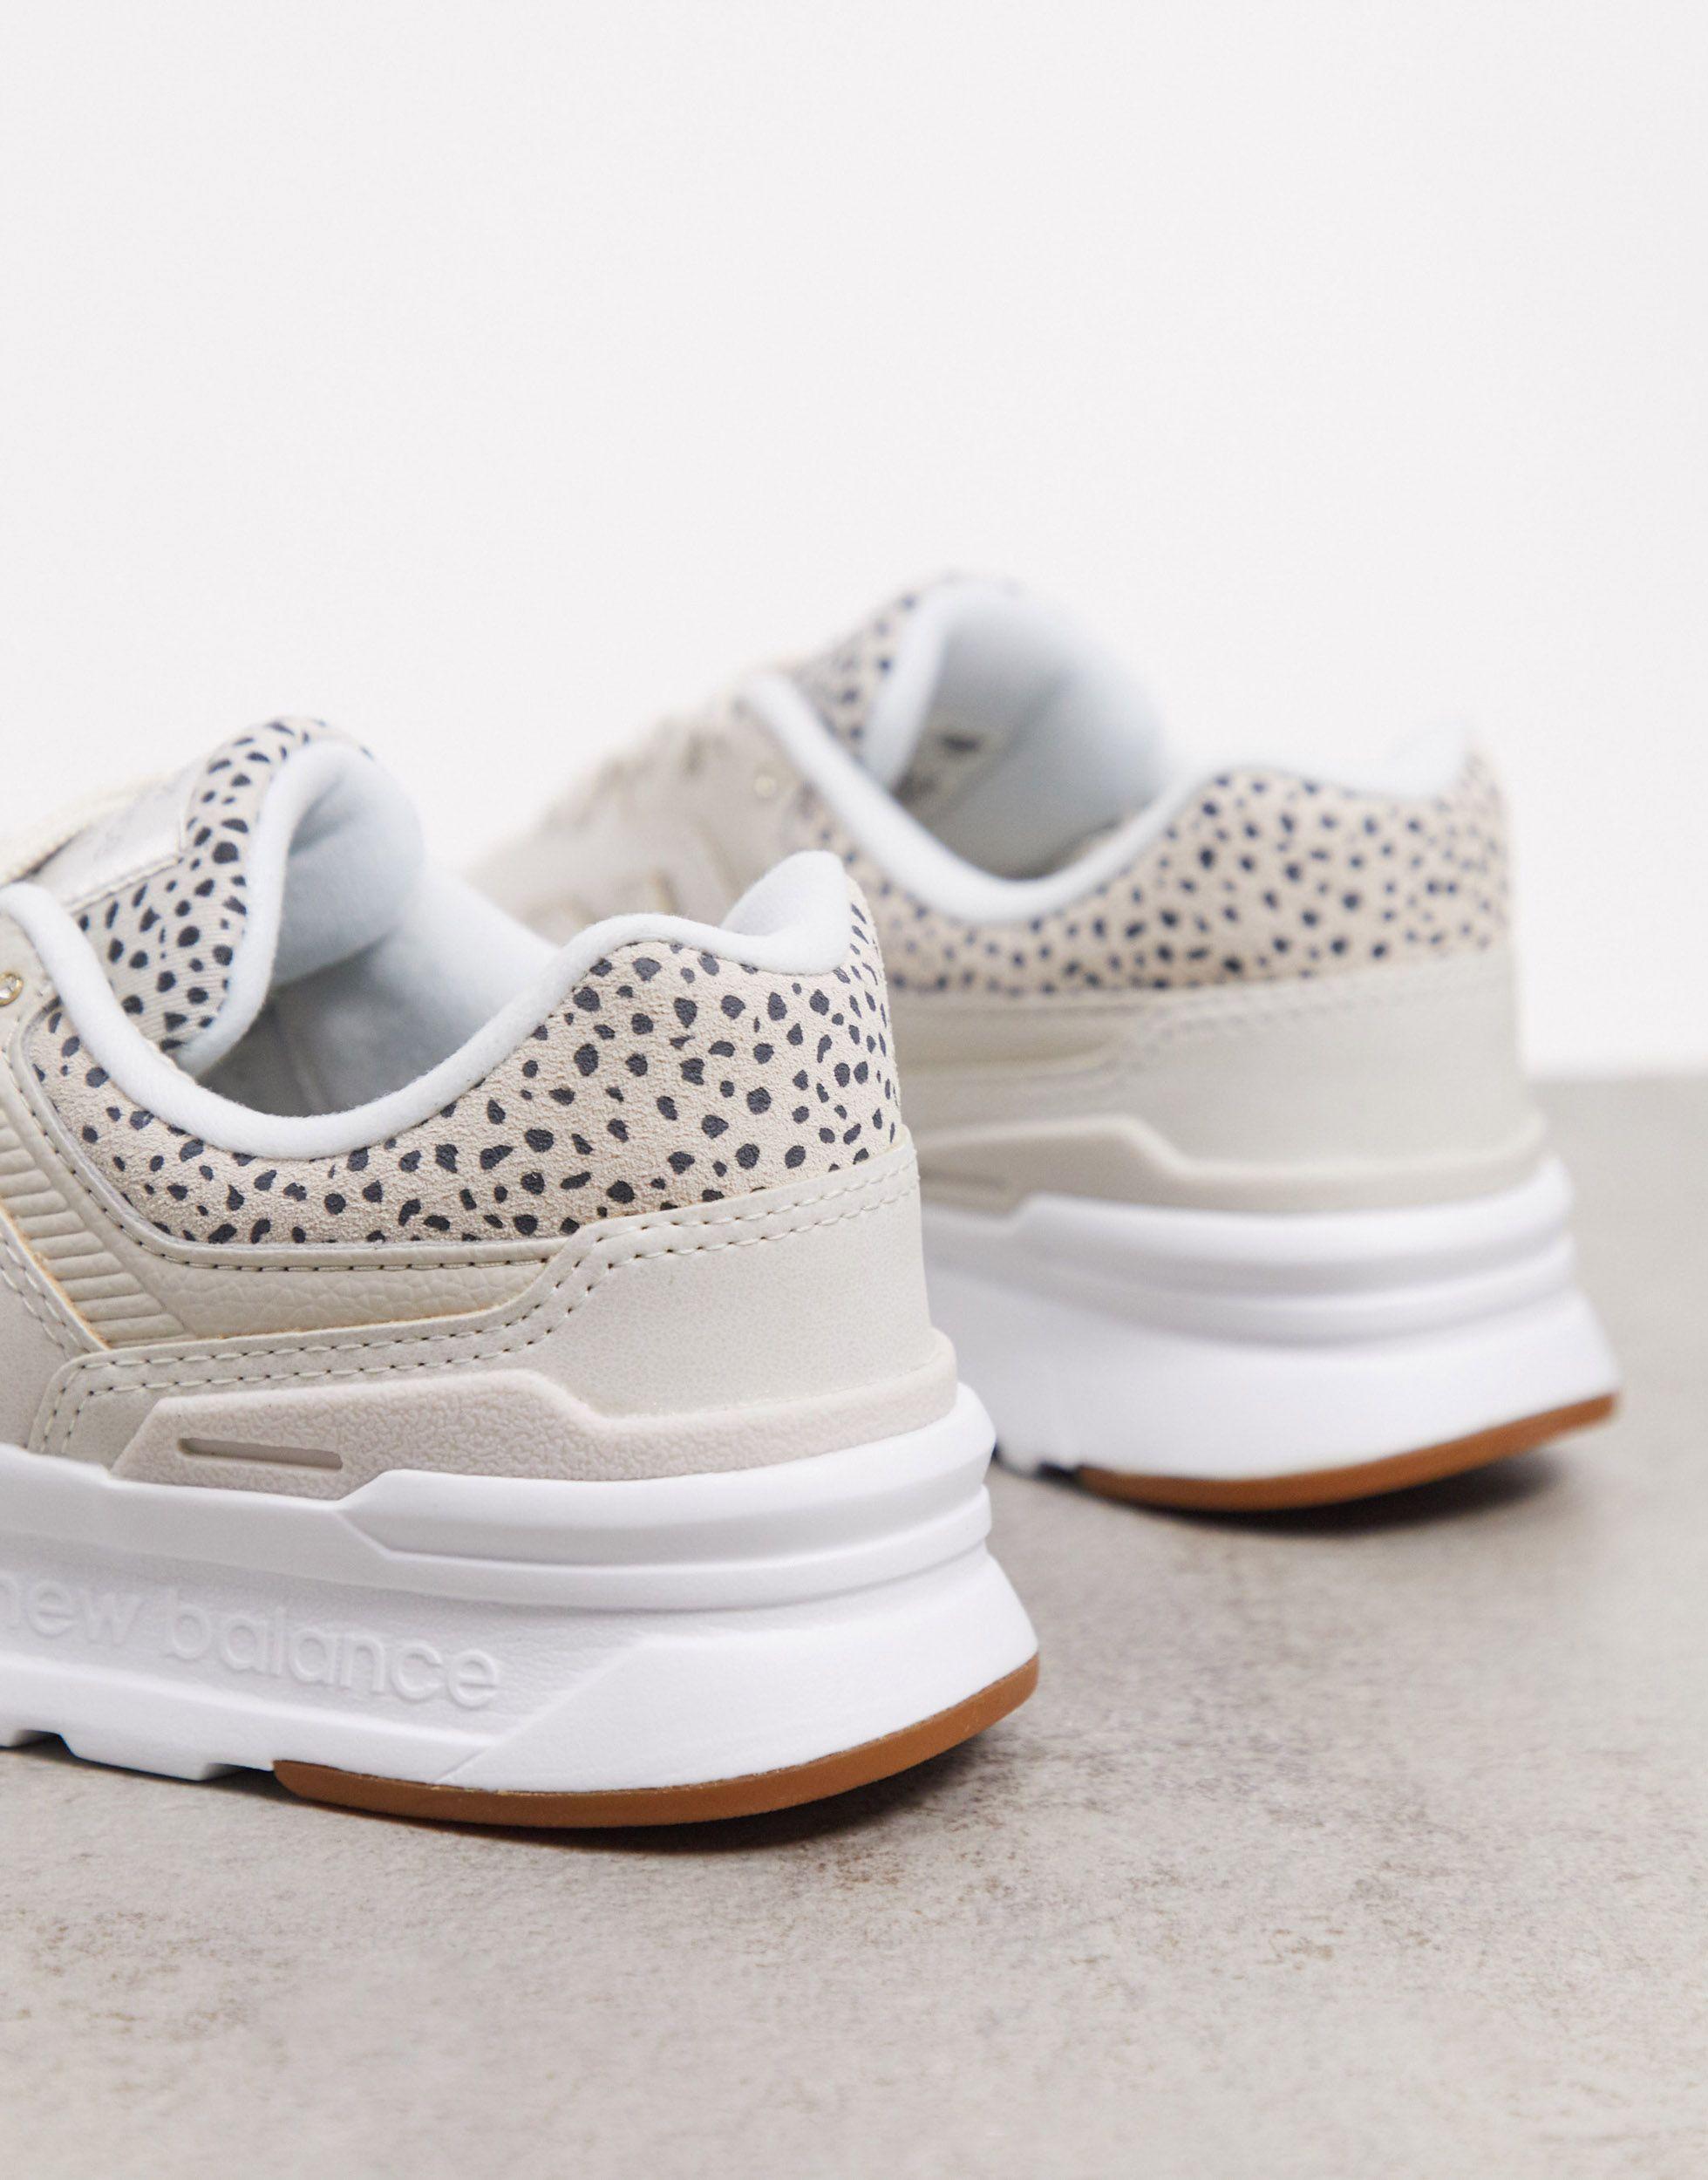 New Balance Rubber 997h Animal Print Trainers in White - Lyst